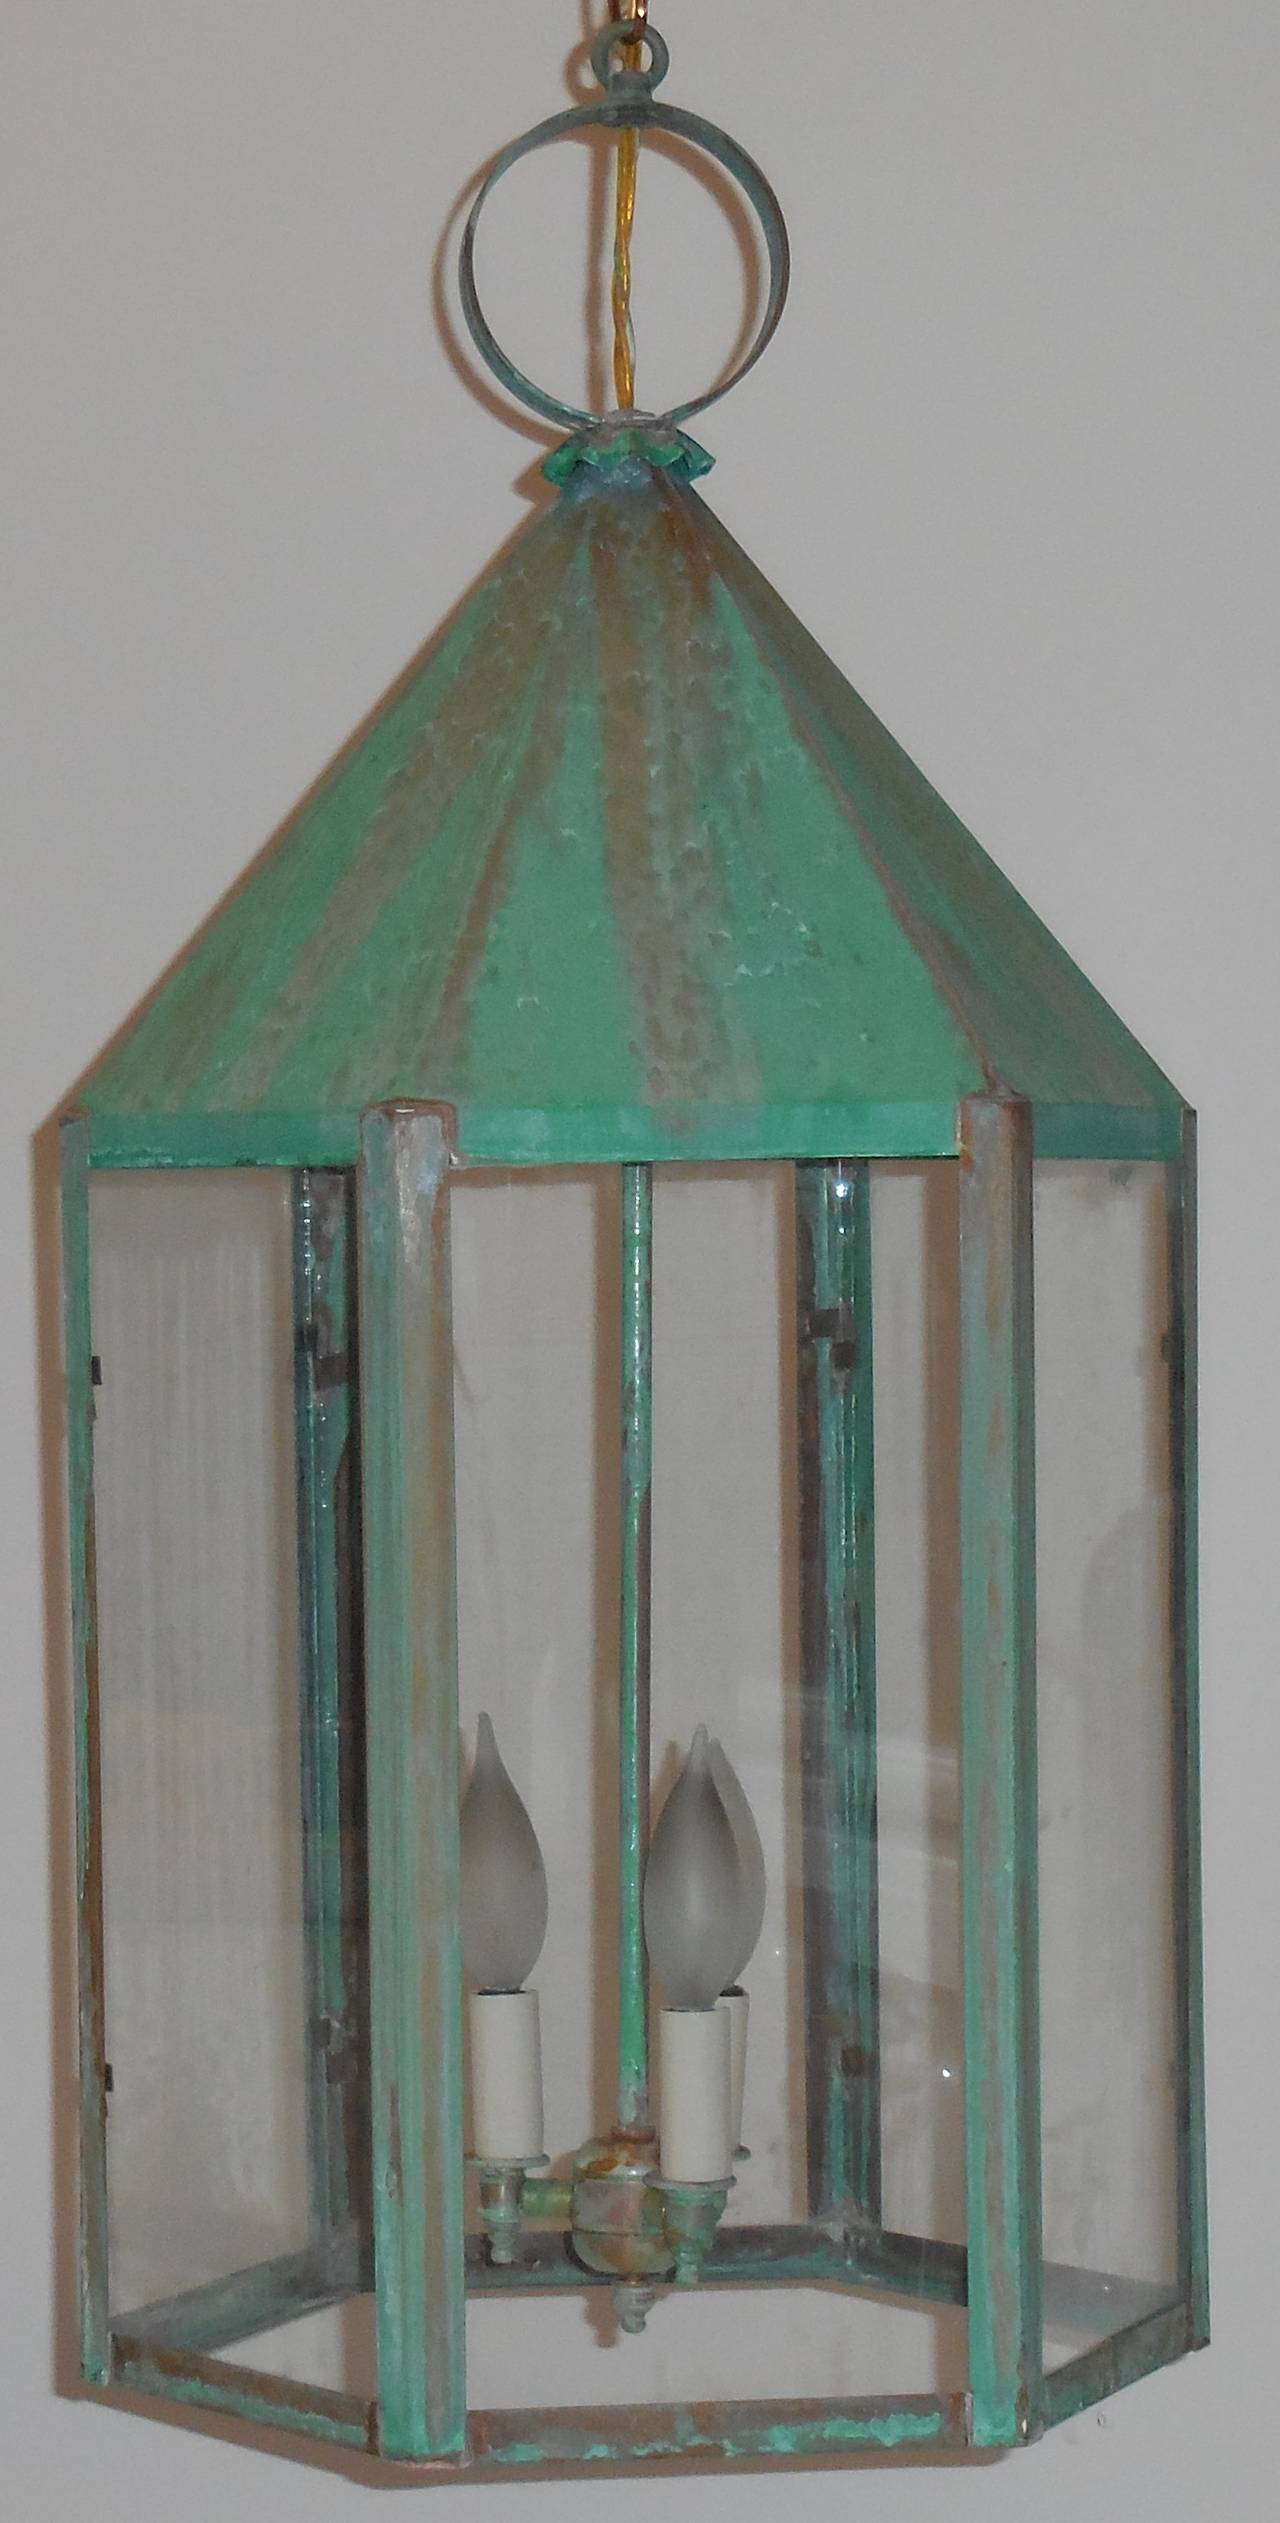 Large architectural six sides lantern made of copper beautiful weathered patina.
Electrified with three 60/watt lights.
Up to code. 
UL approved.
Copper canopy and chain included.